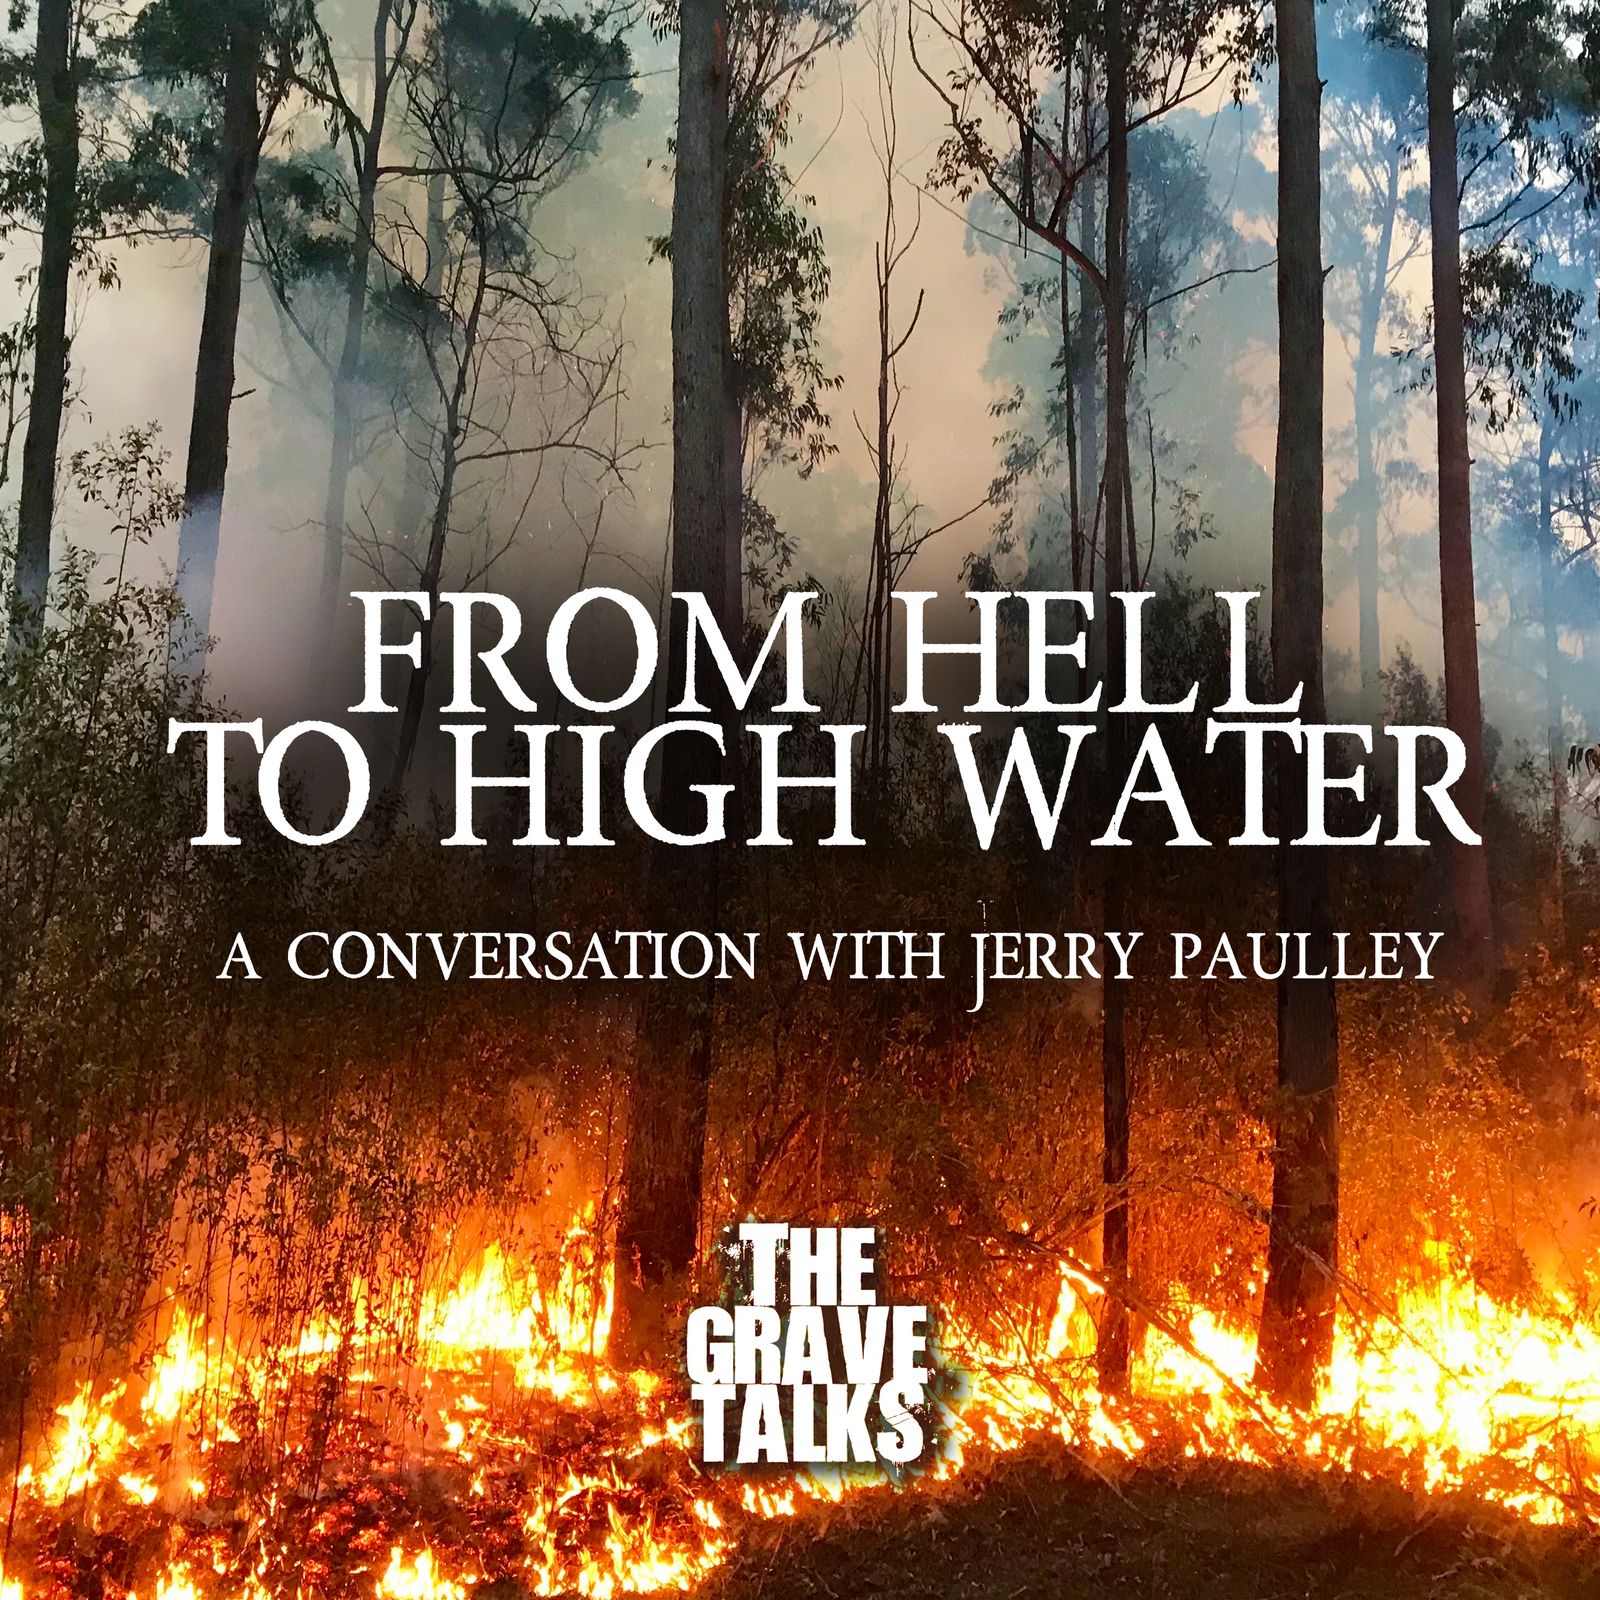 From Hell to High Water | A Conversation With Jerry Paulley